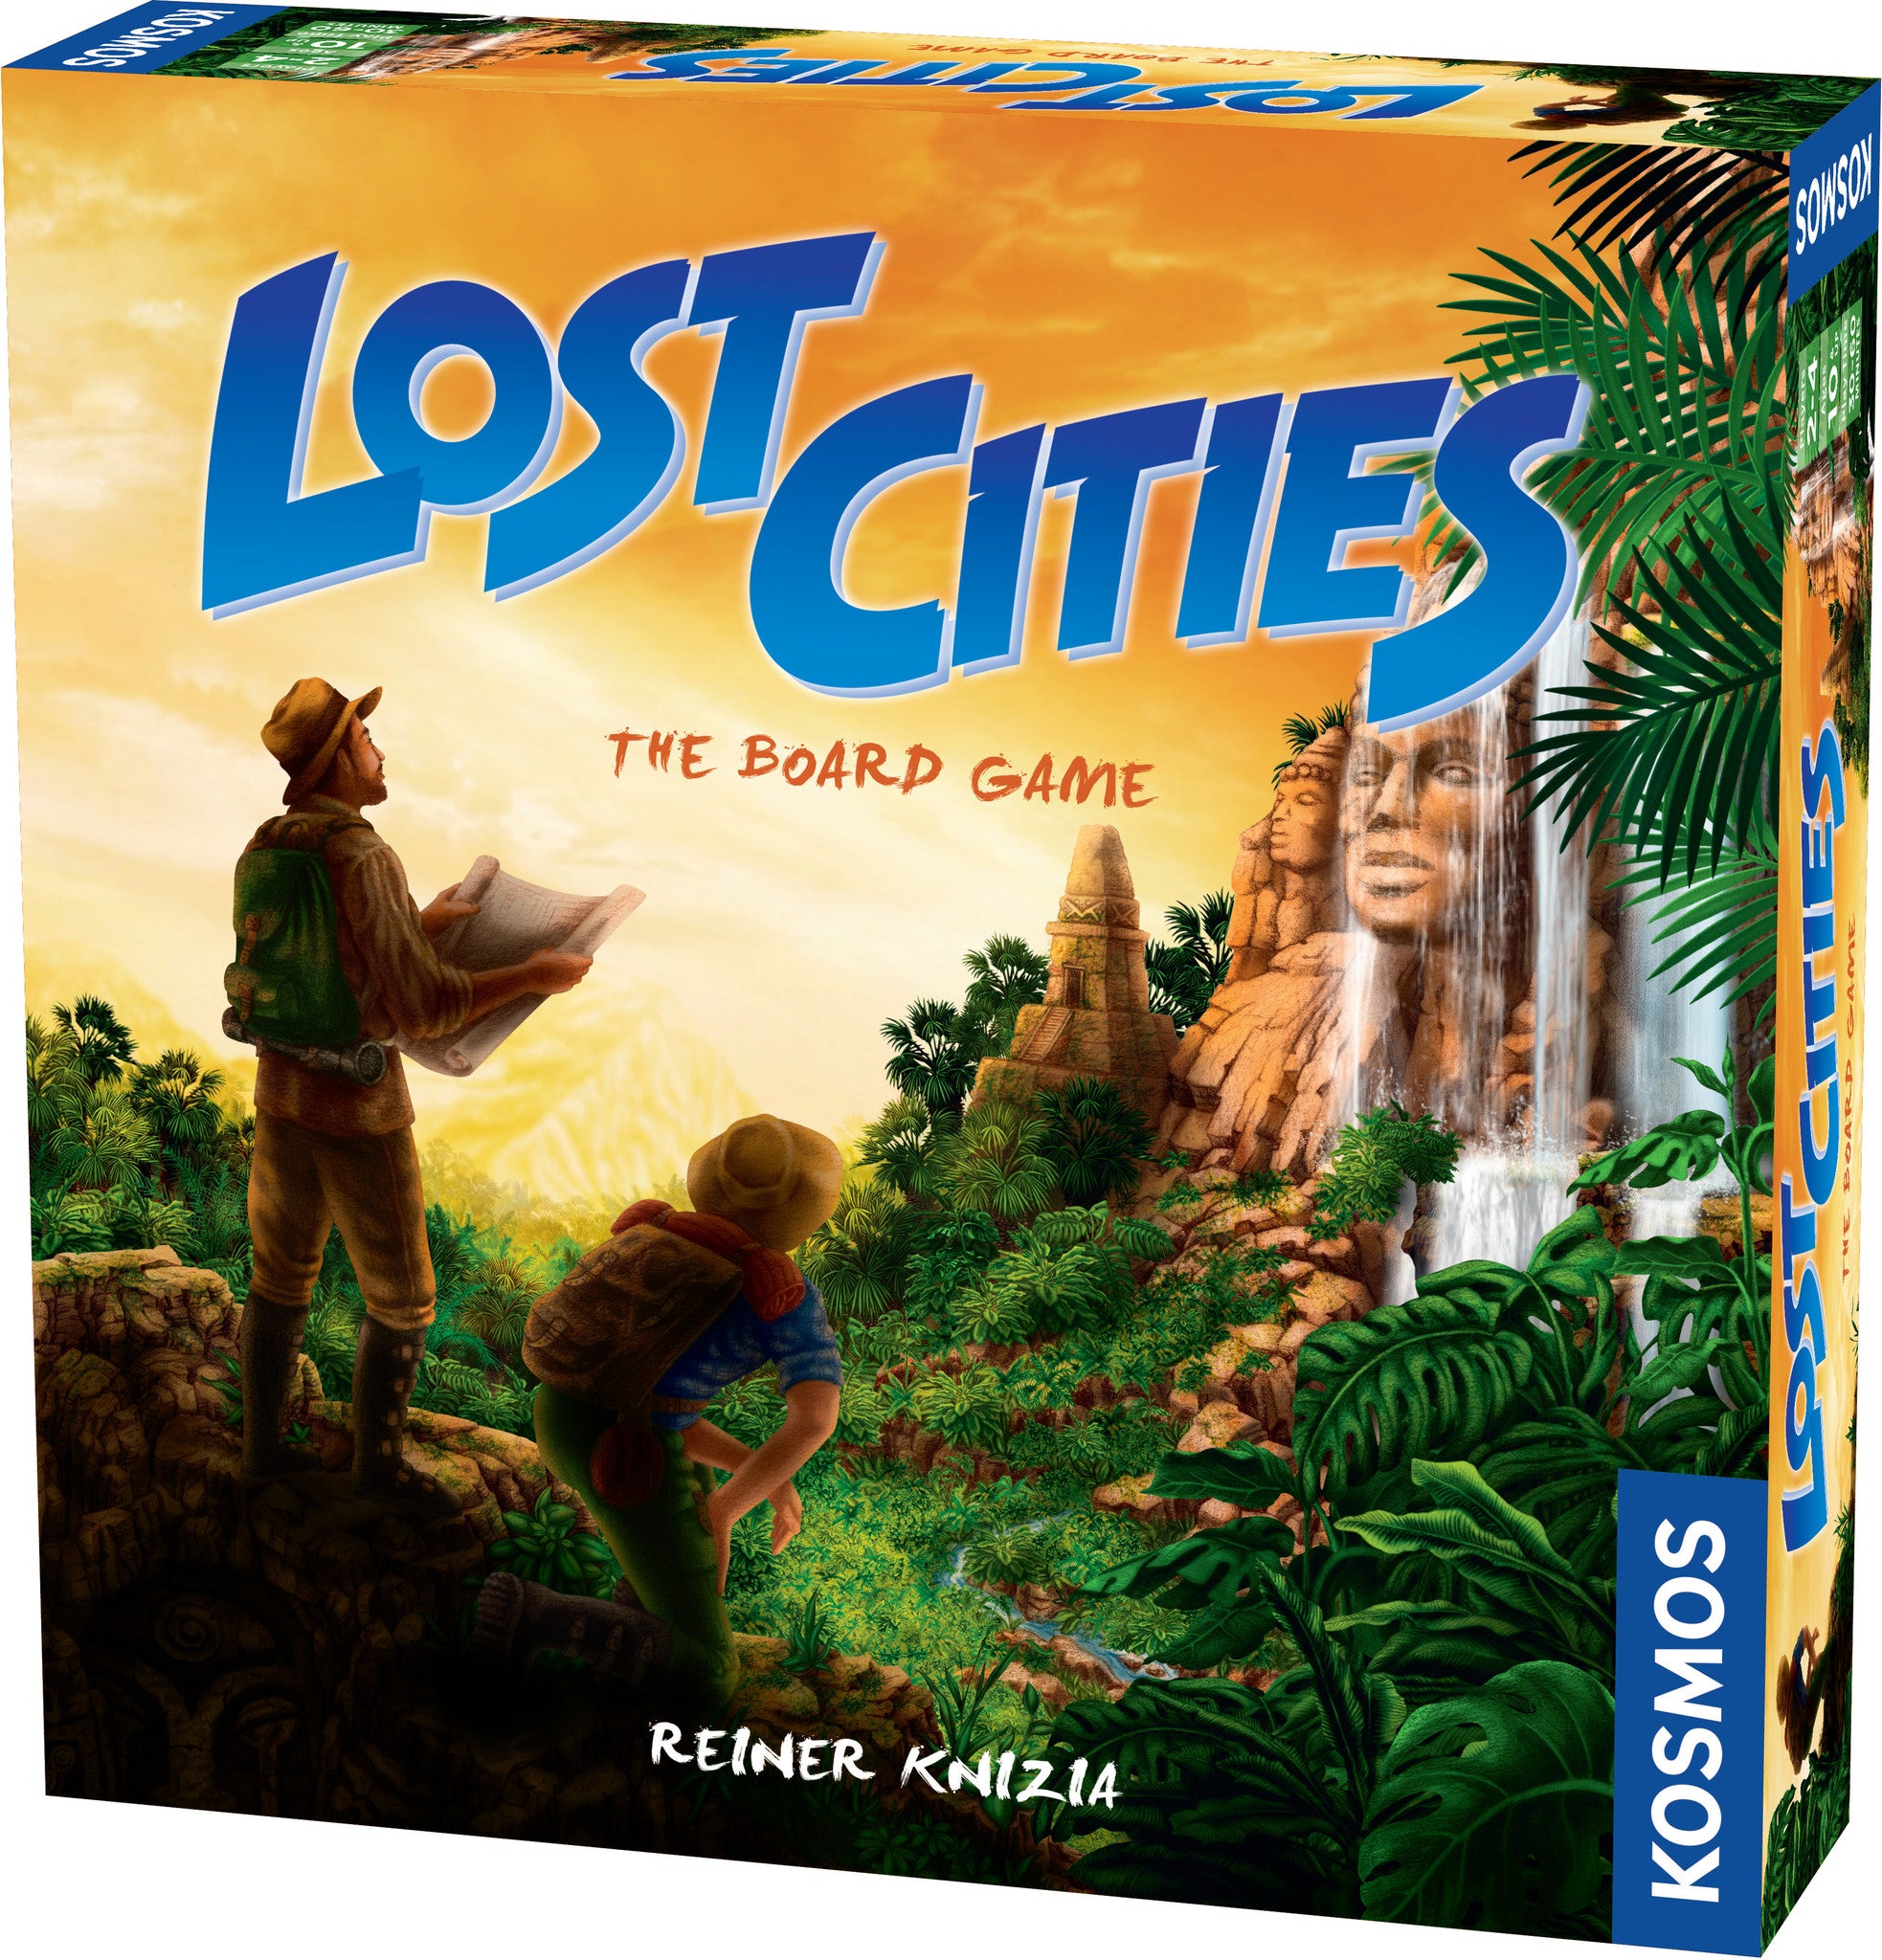 Thames & Kosmos Lost Cities The Board Game 696175